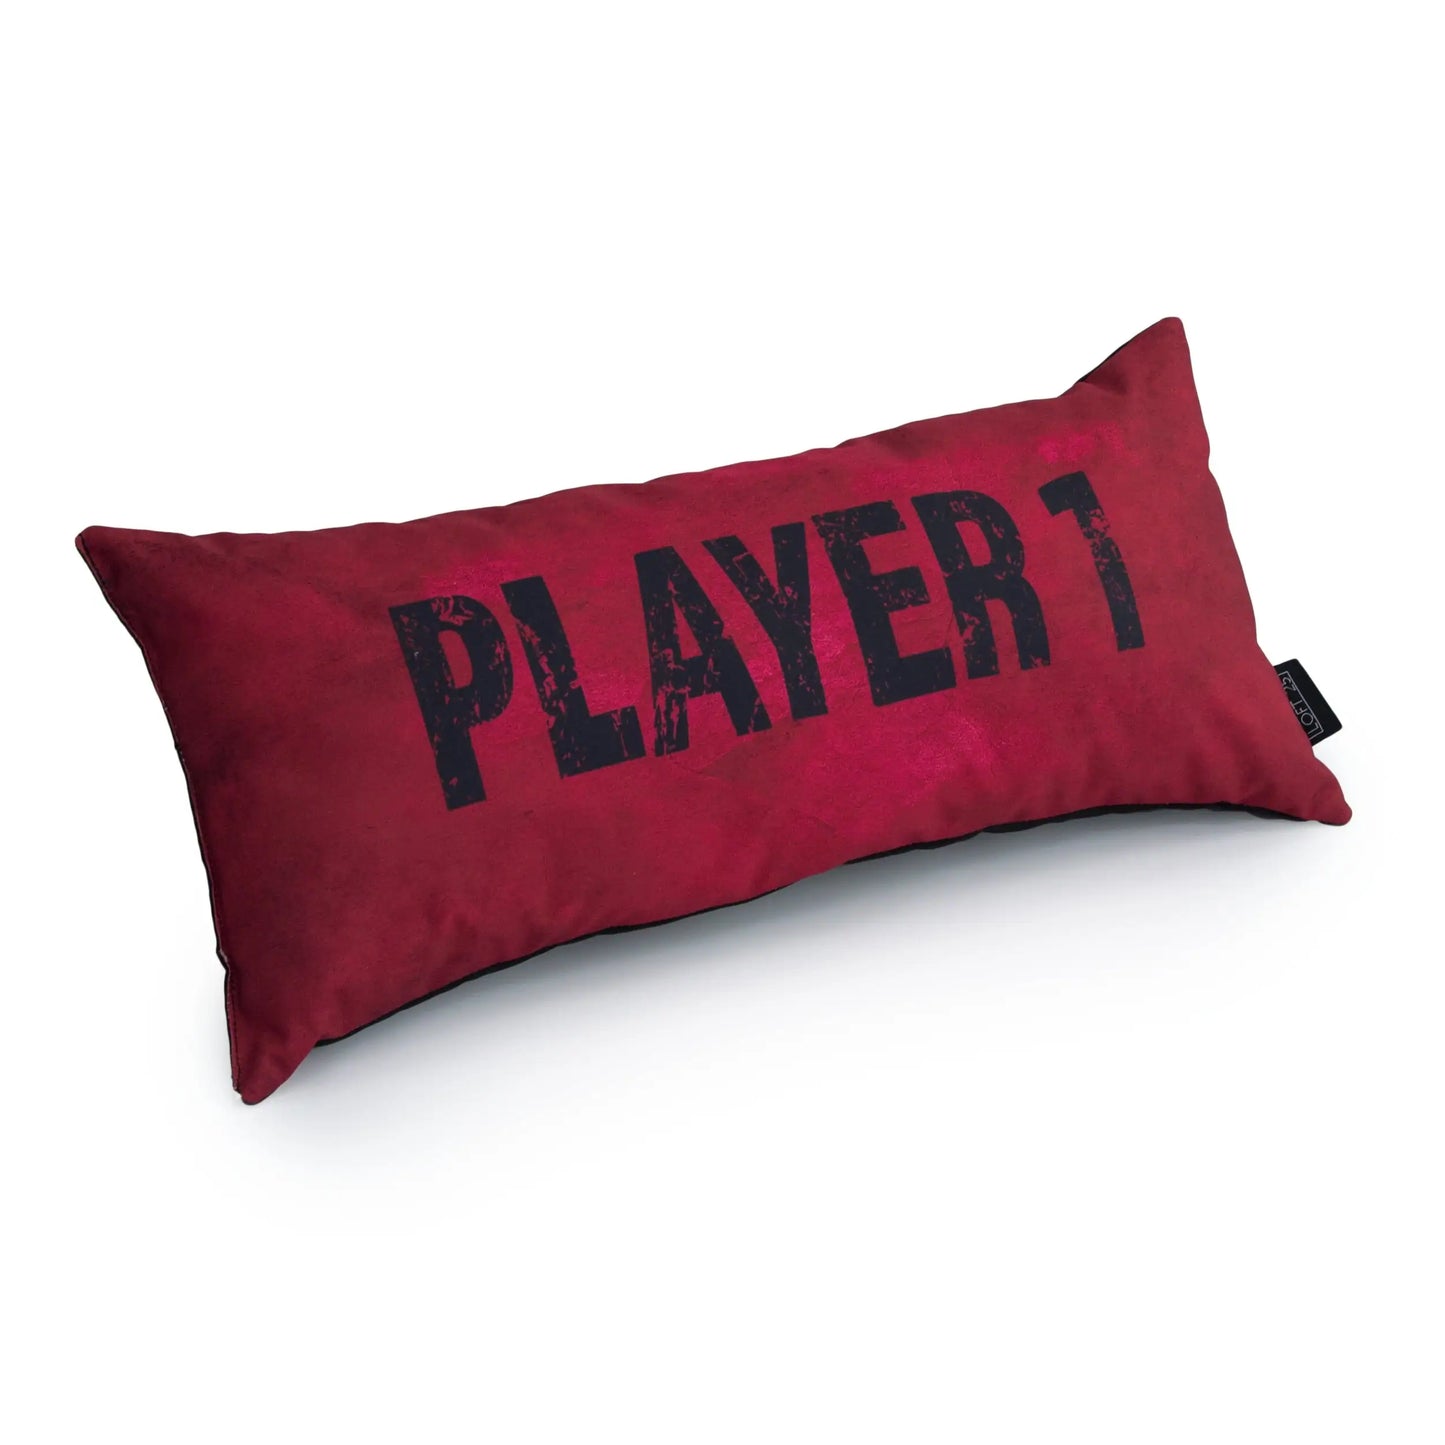 A red pillow with the text "PLAYER 1" written on it.